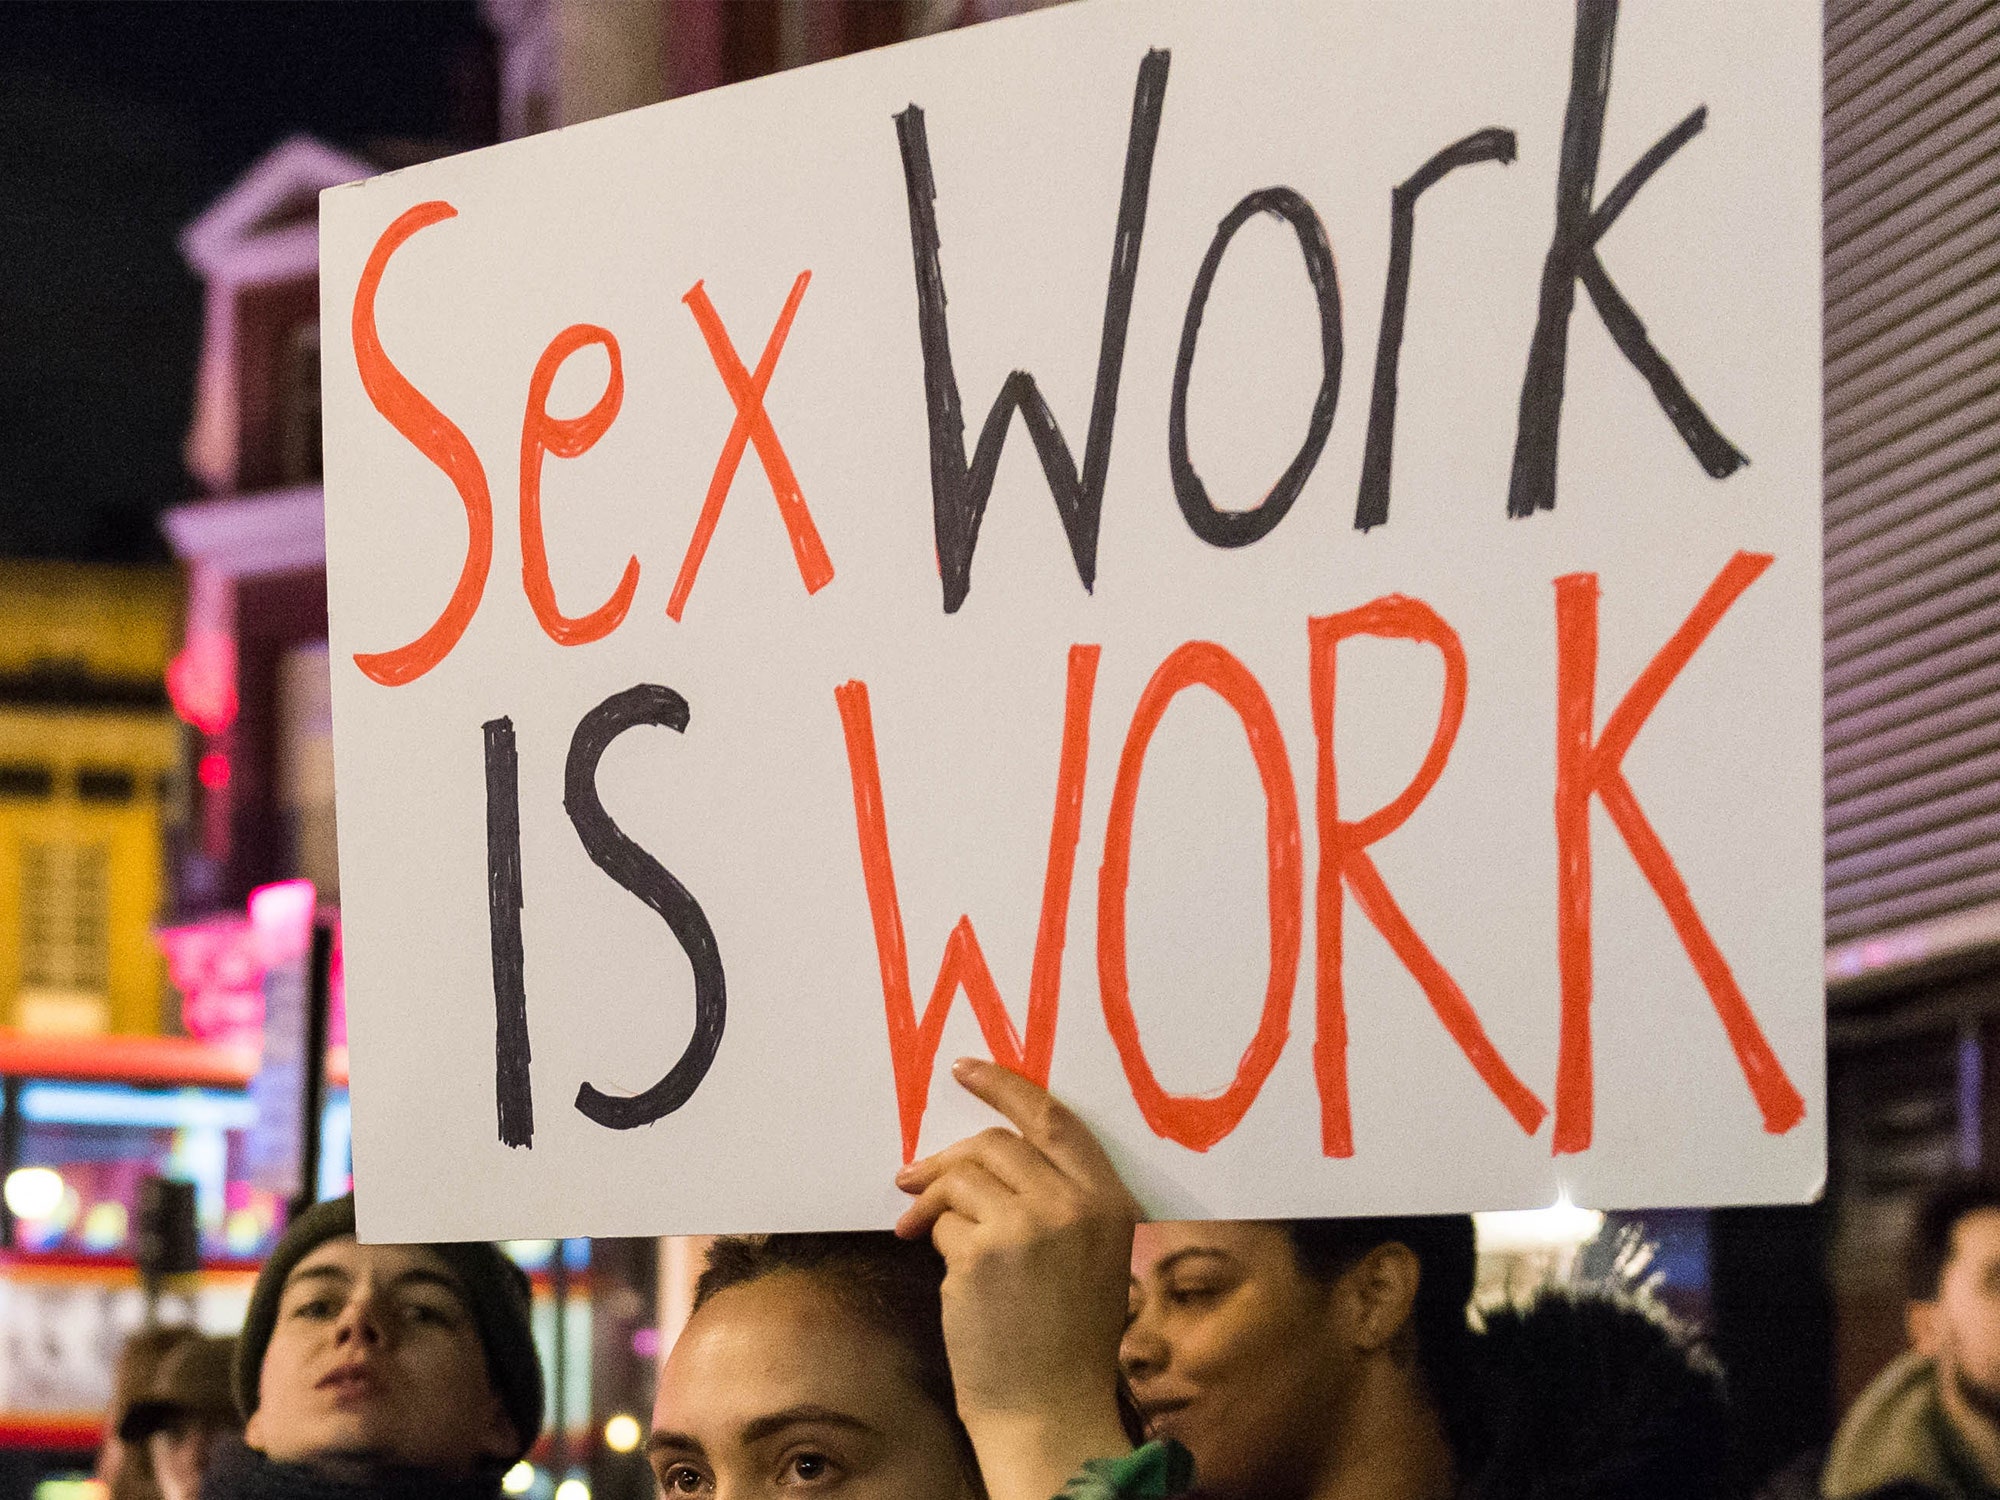 Making sense of prostitution, human trafficking and sex work and what's the way forward